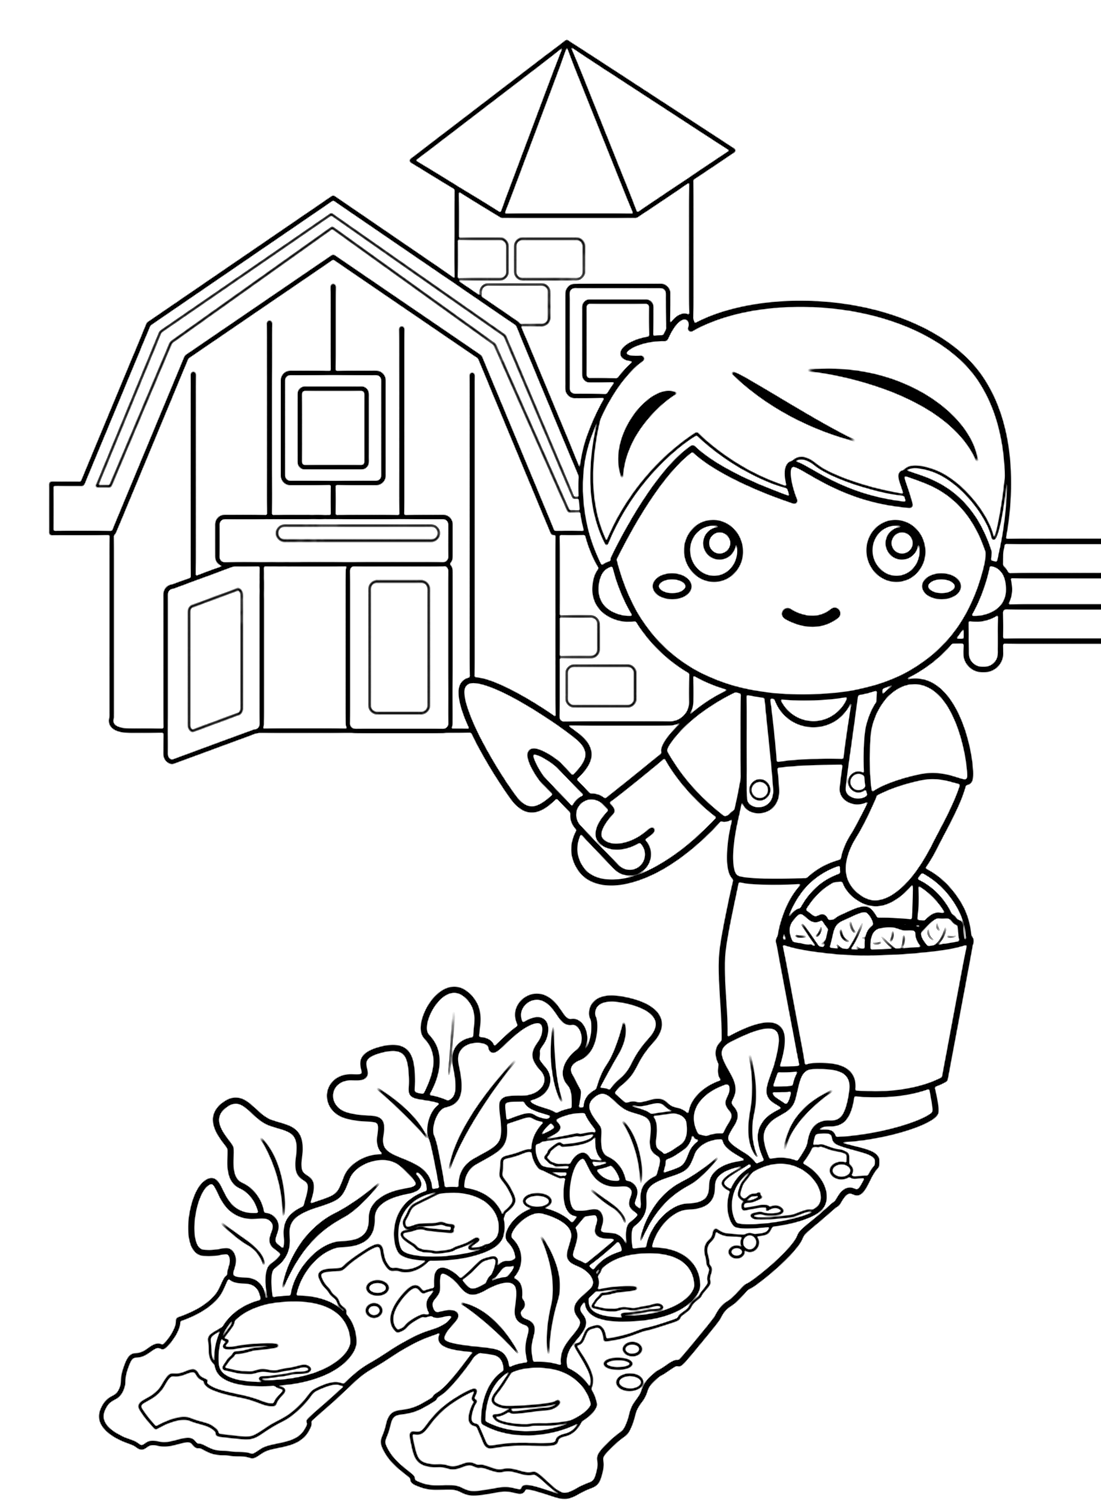 A boy plants trees coloring pages